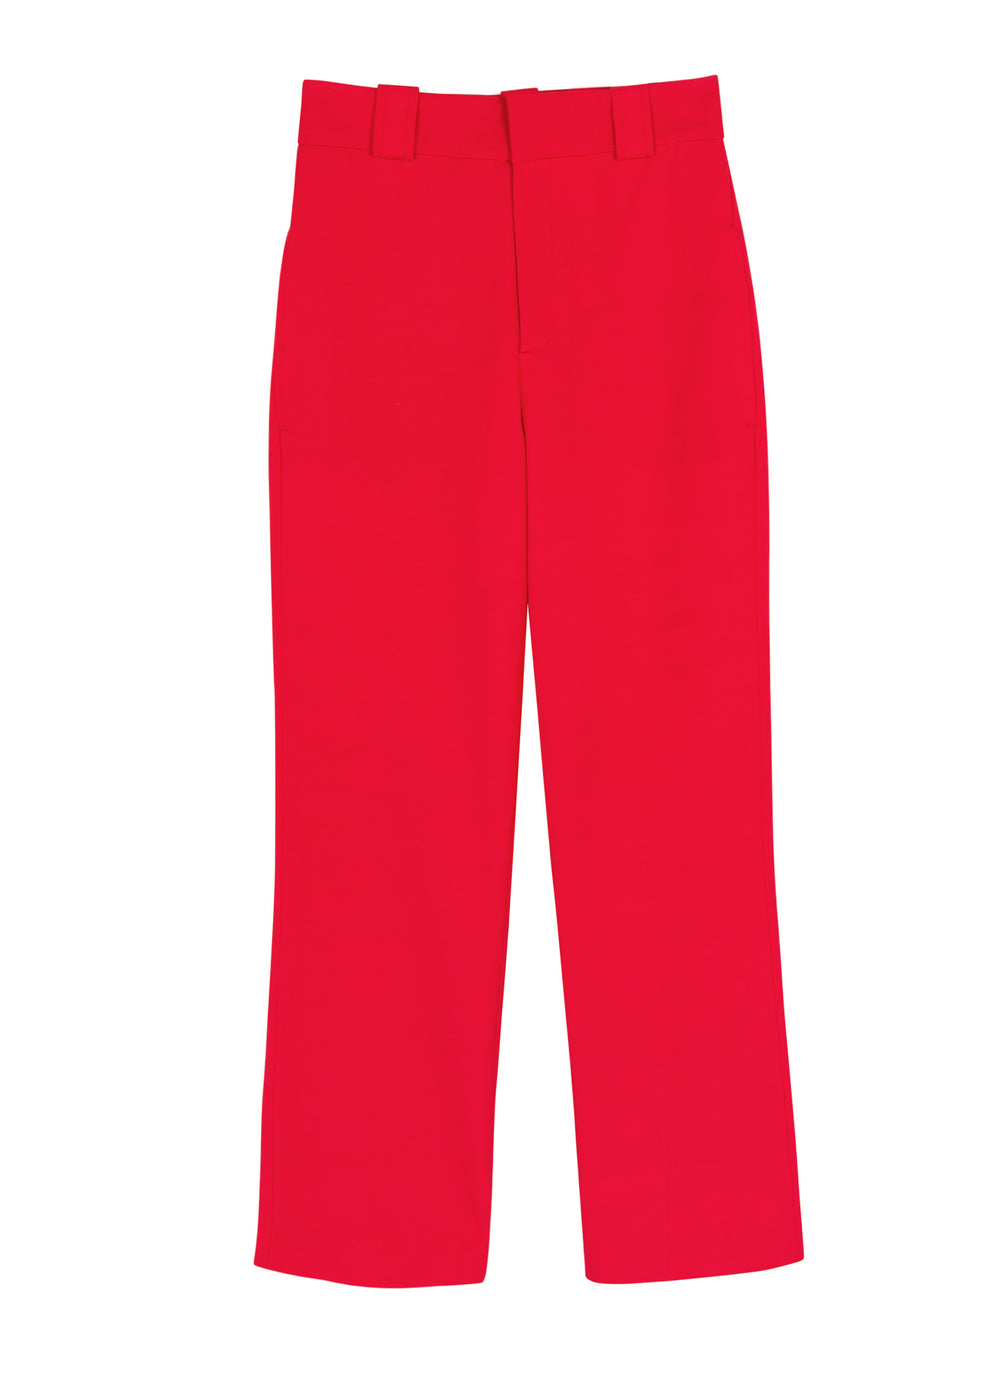 flatlay red ankle pant